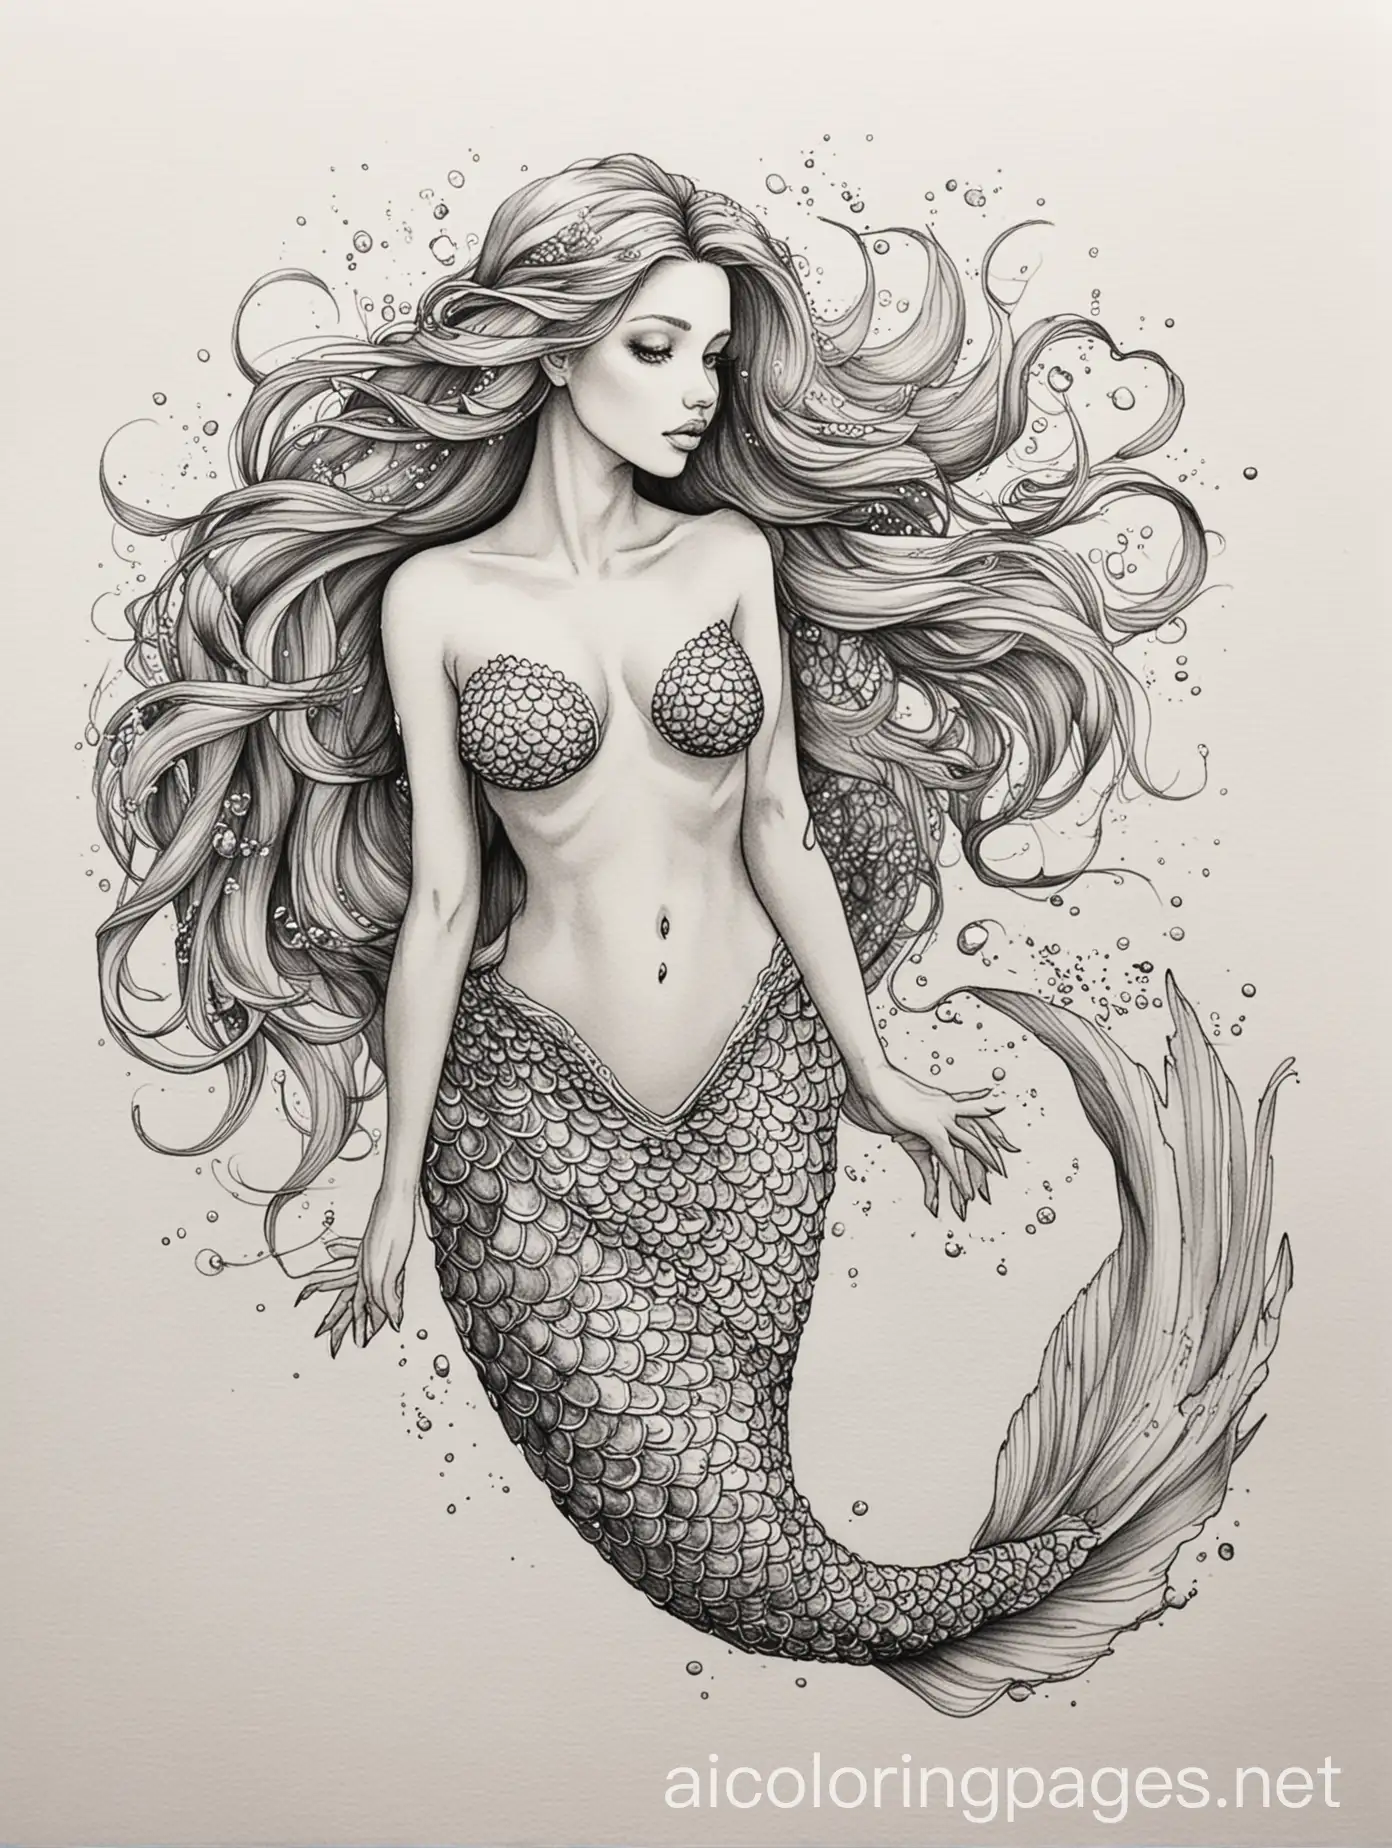 Graceful-Mermaid-Pen-and-Ink-Watercolor-Art-Coloring-Page